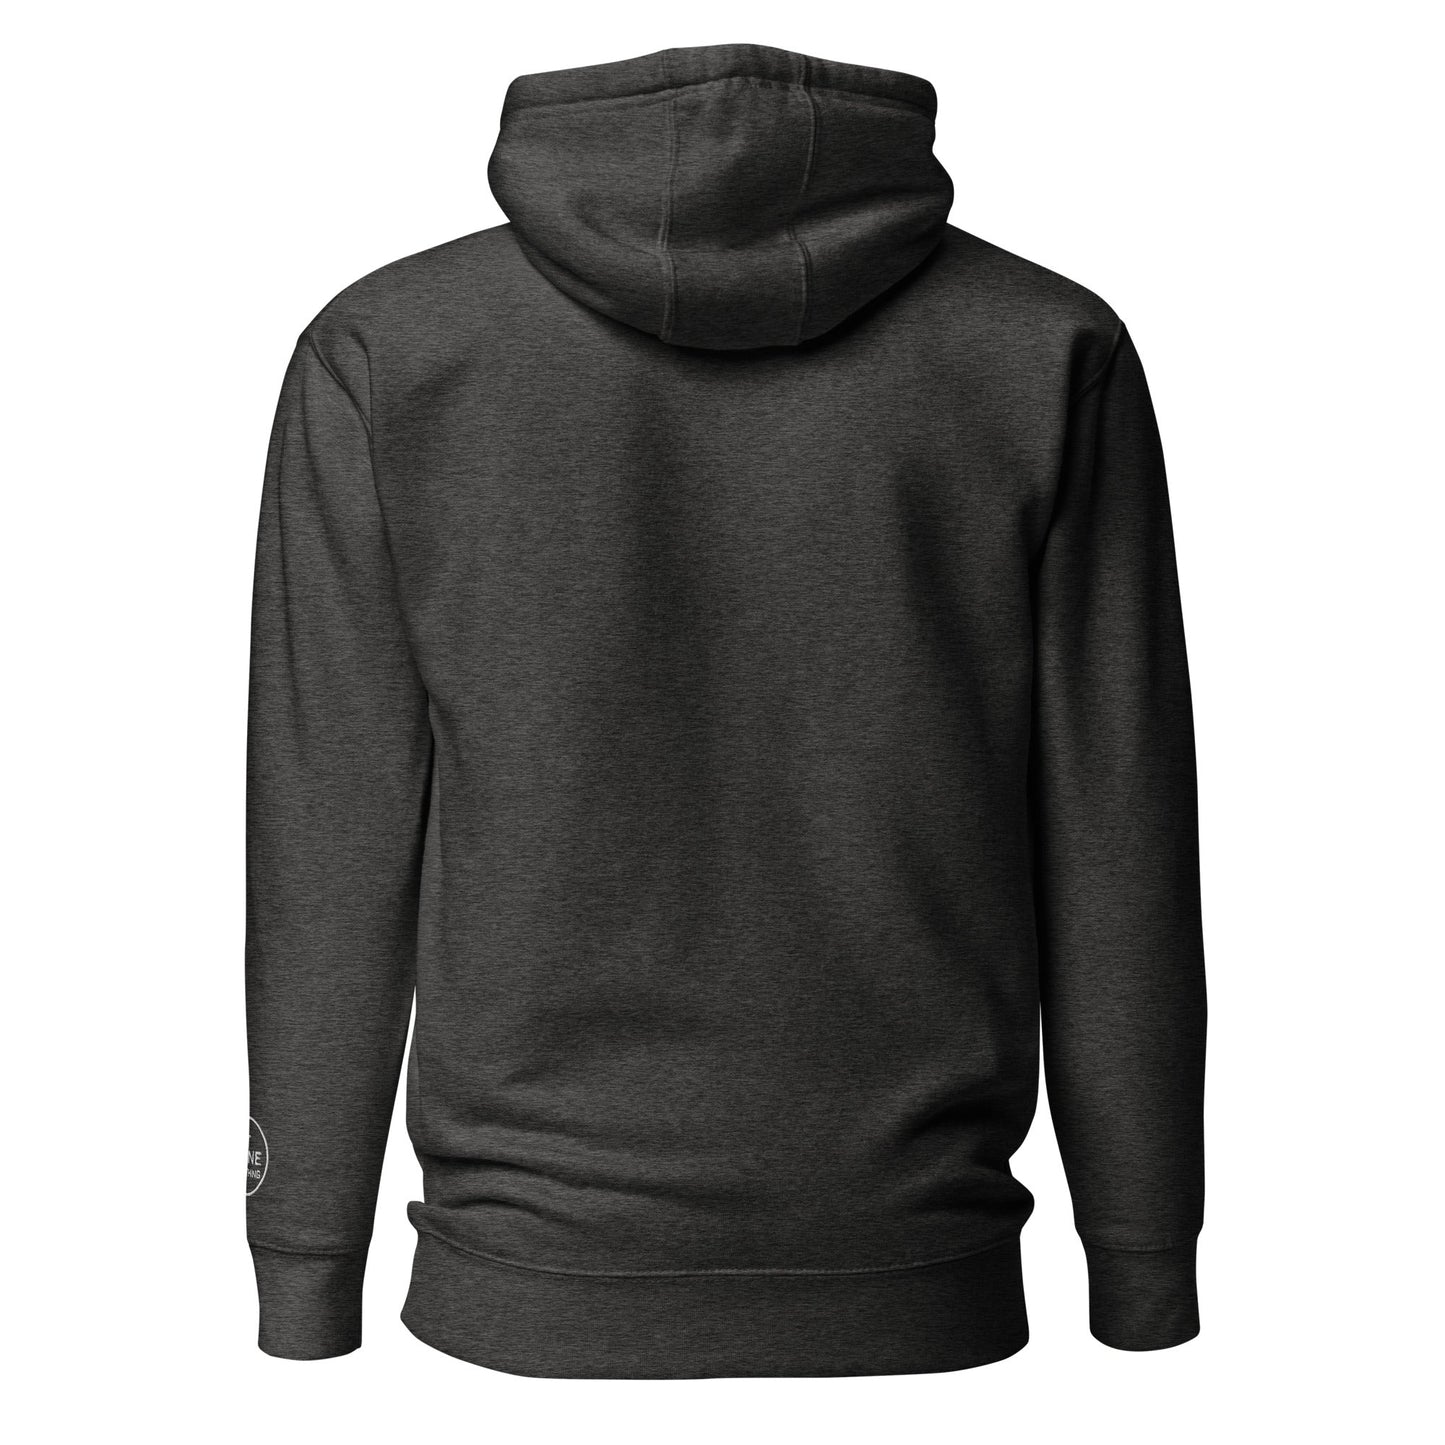 PIT LANE CLOTHING Embroidered Heavyweight Hoodie - Grey Carbon